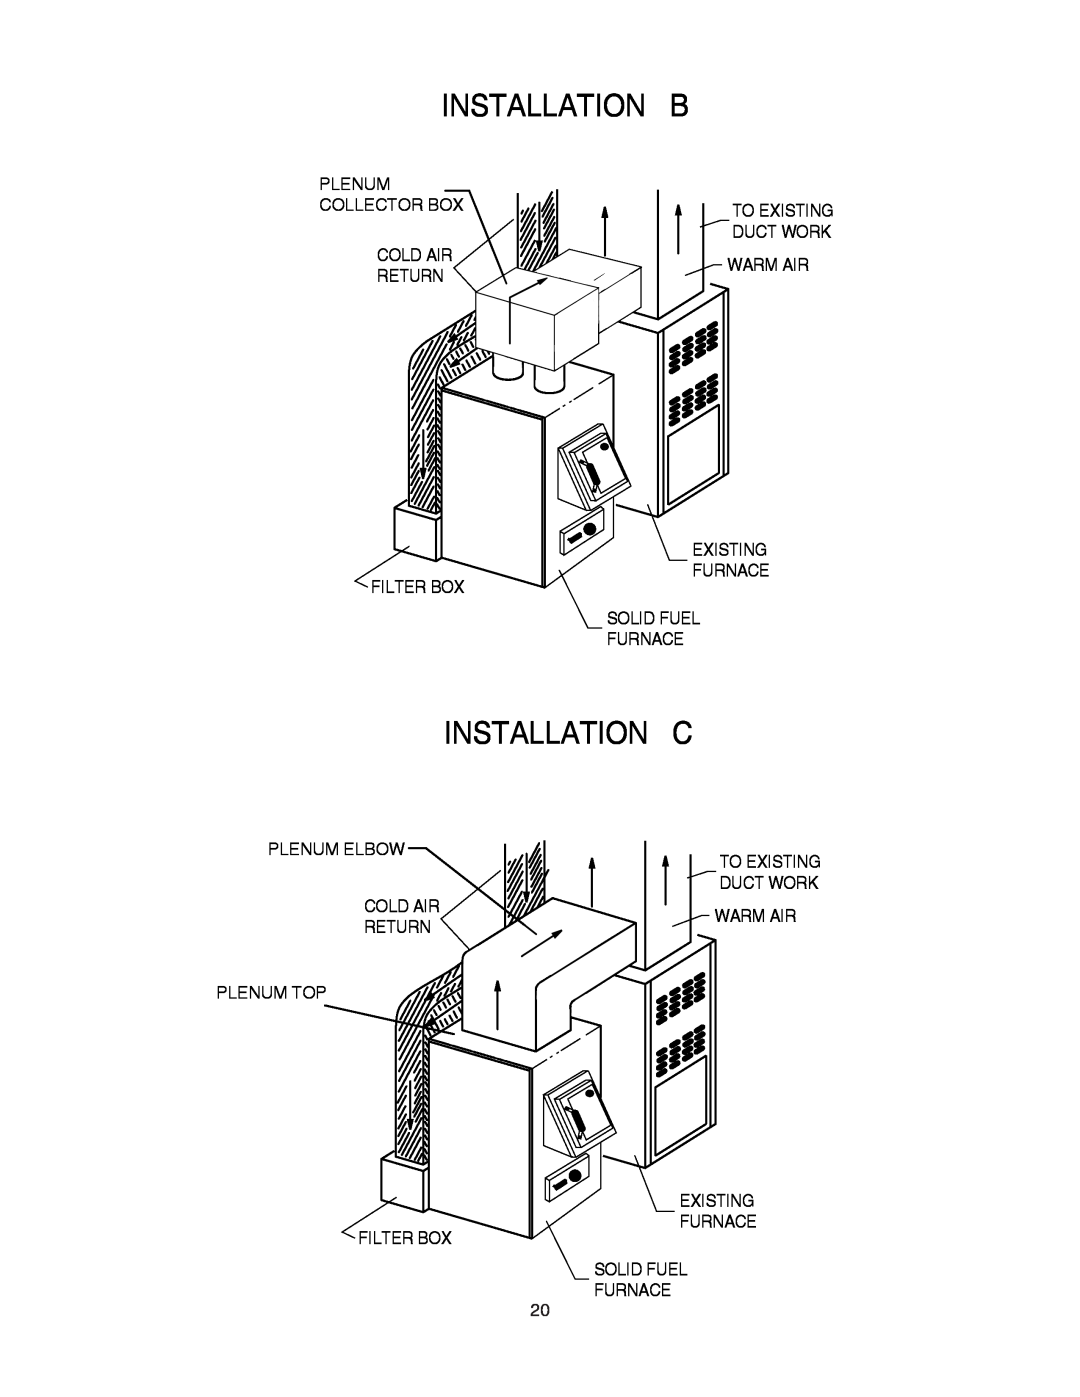 United States Stove 1500 owner manual Installation B, Installation C, Plenum Collector Box Cold Air Return Filter Box 